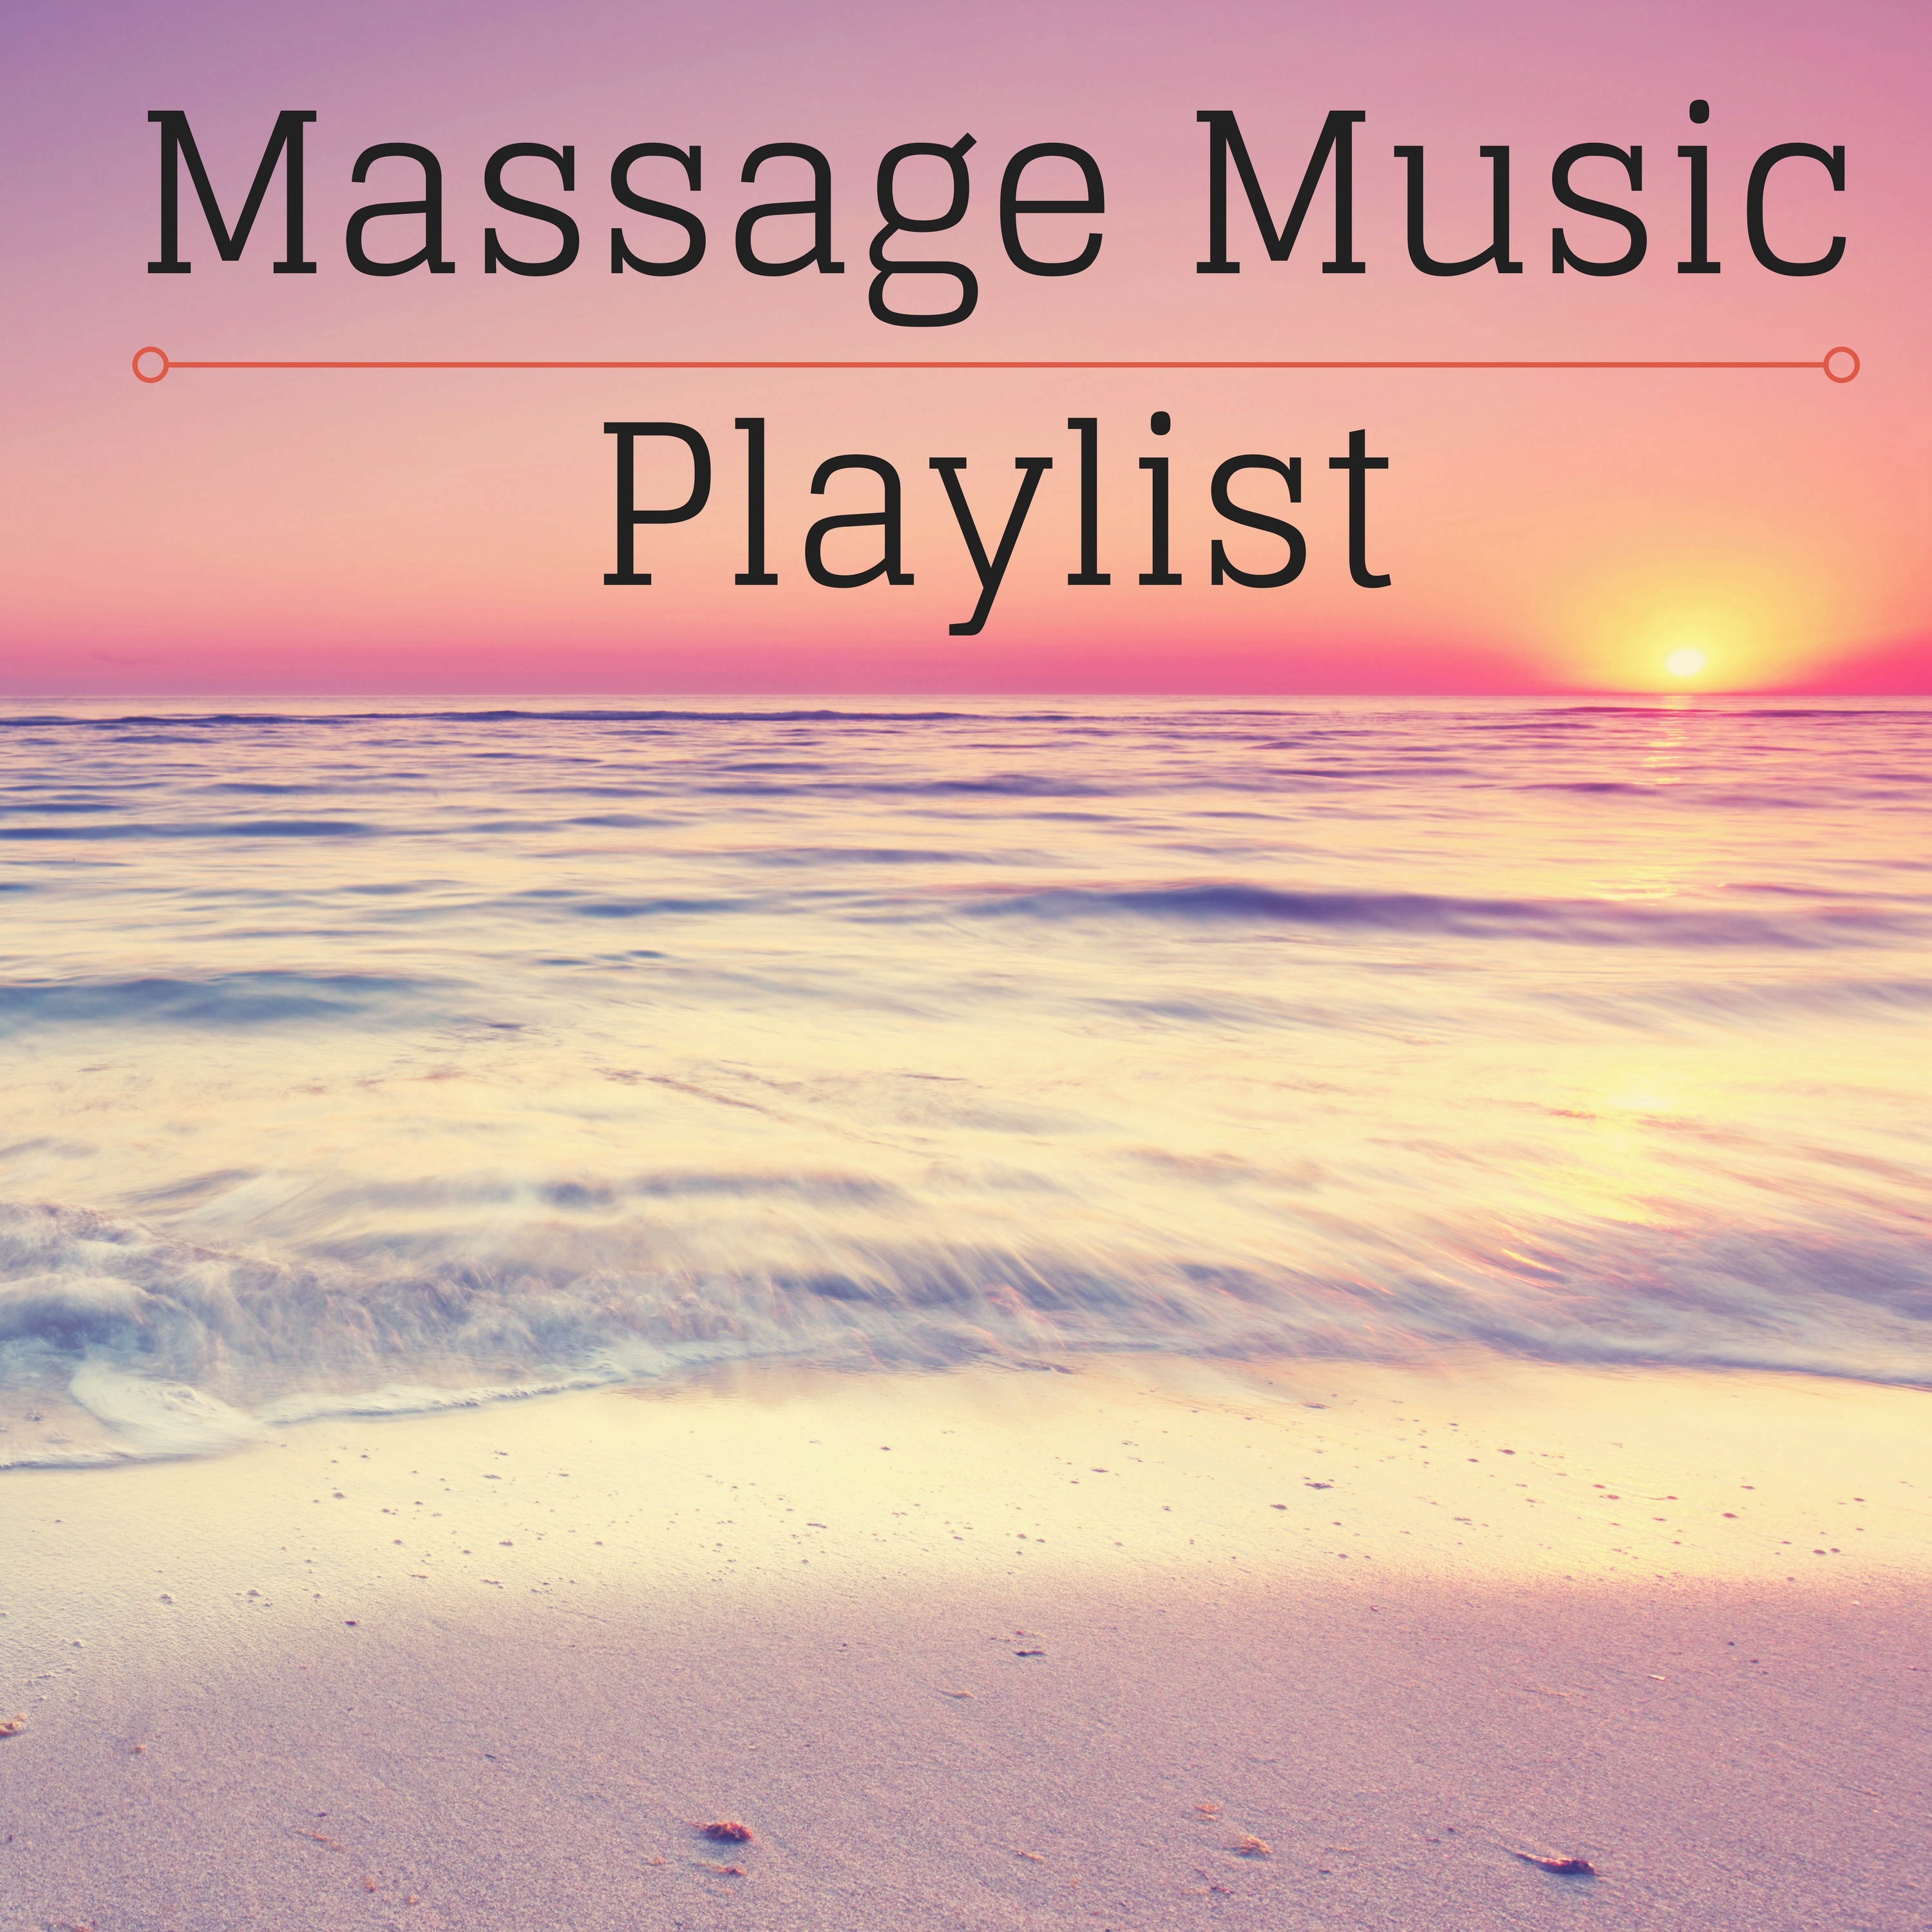 Massage Music Playlist - Sounds of Nature for Deep Sleep and Relaxation